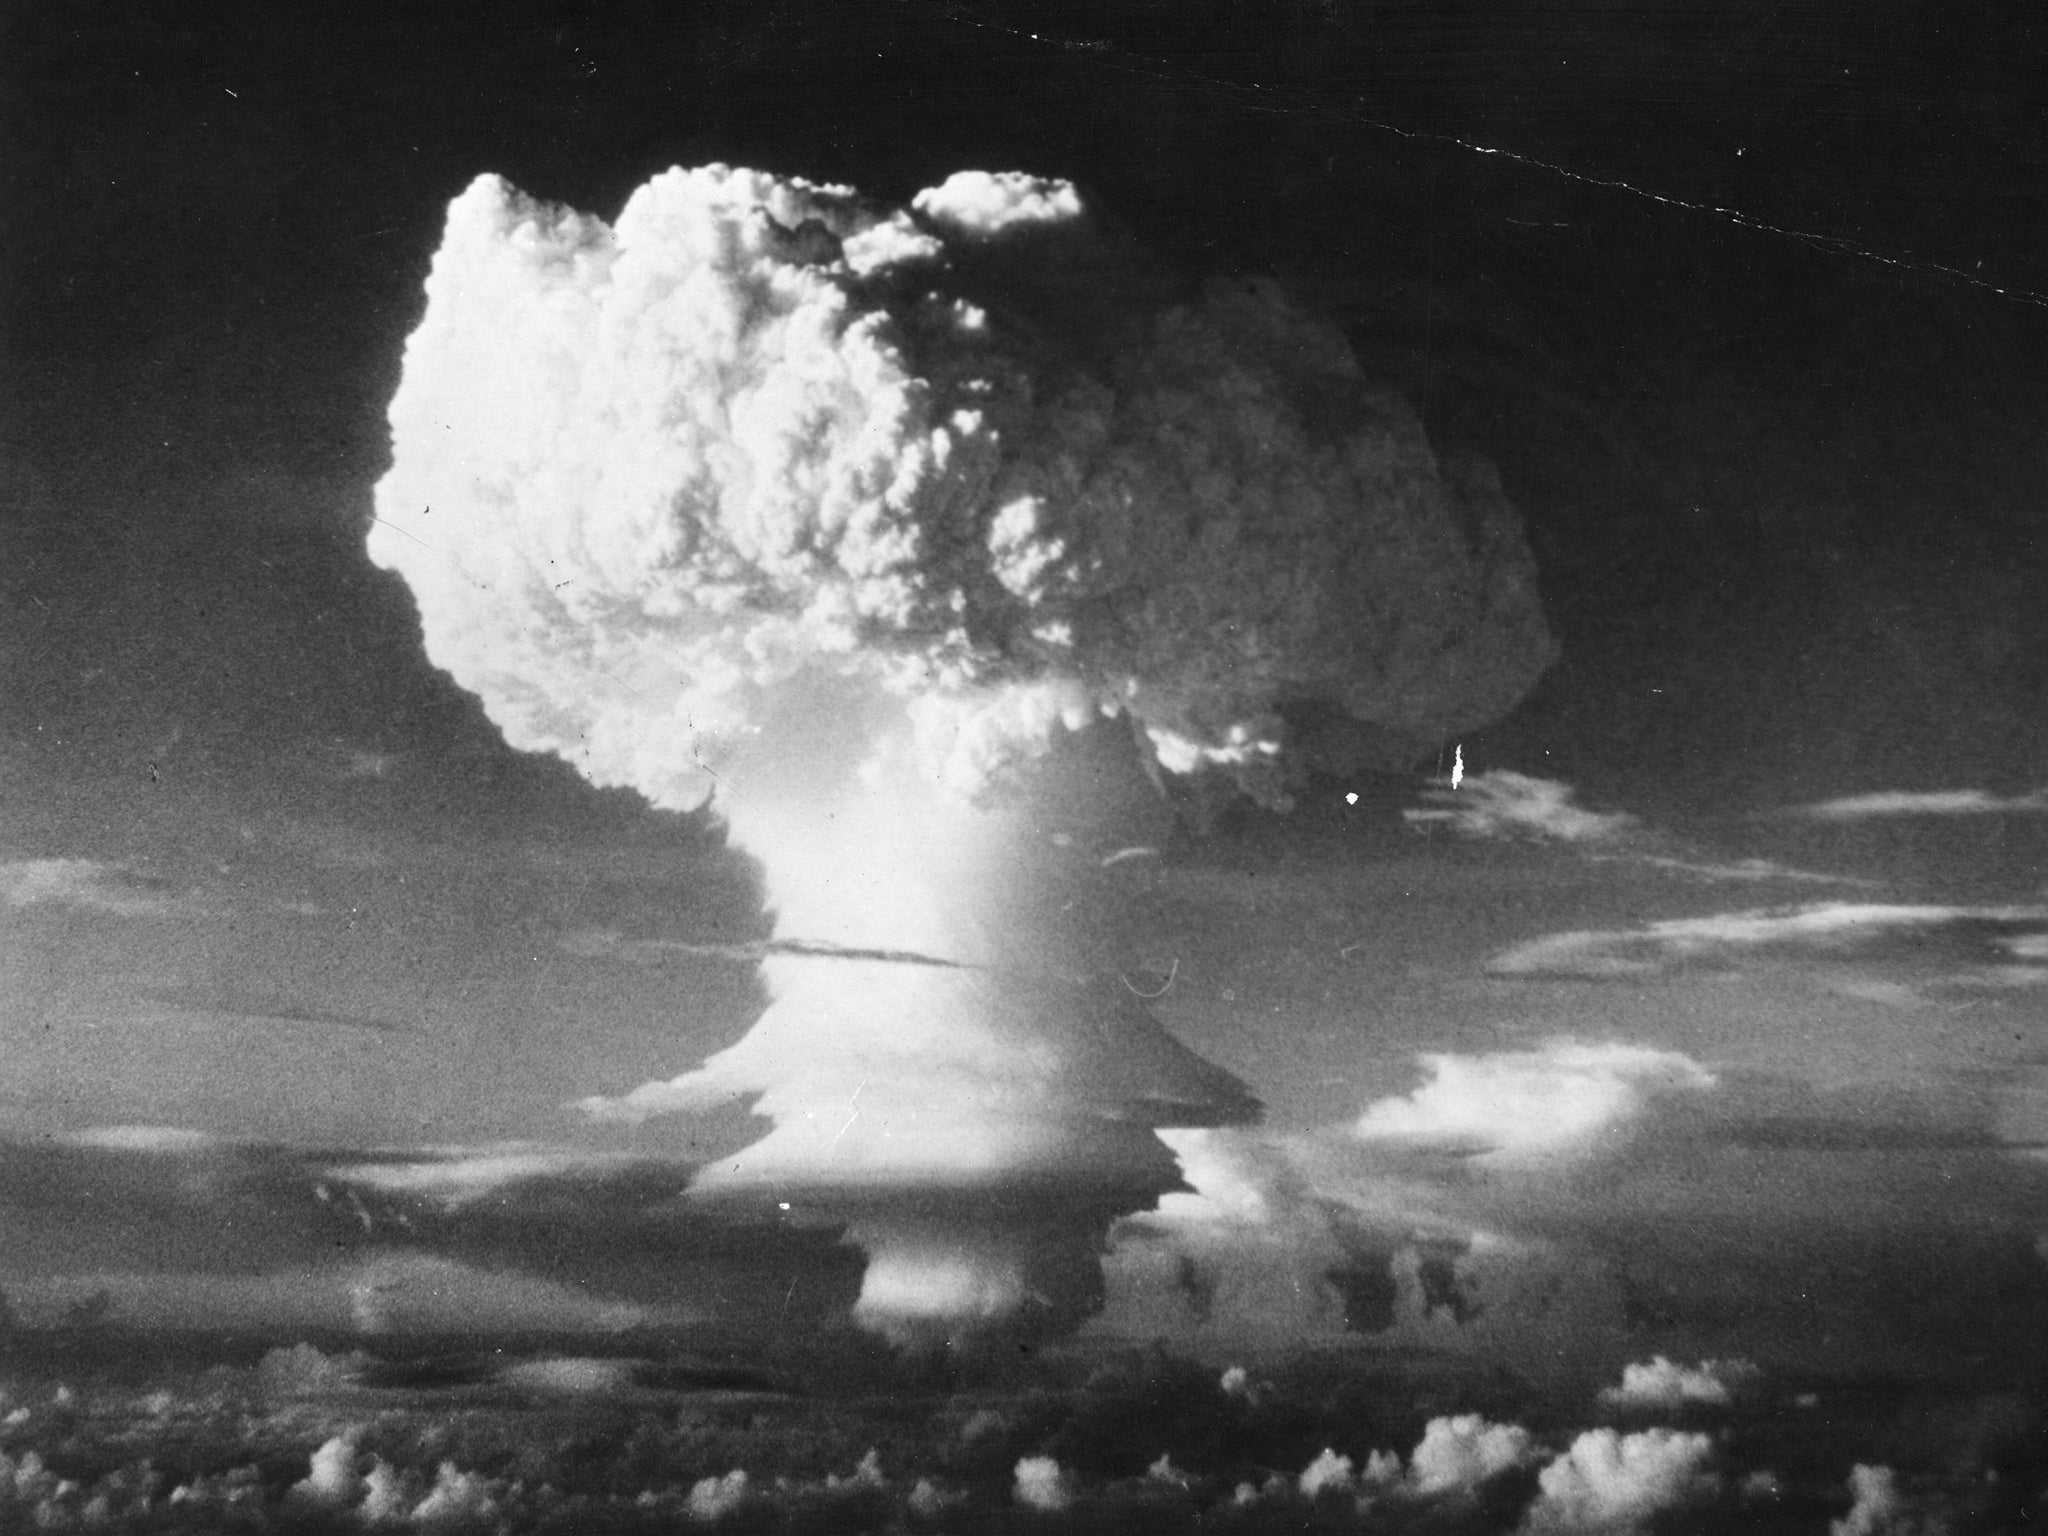 'The Anthropocene': The human epoch started with first atomic bomb test